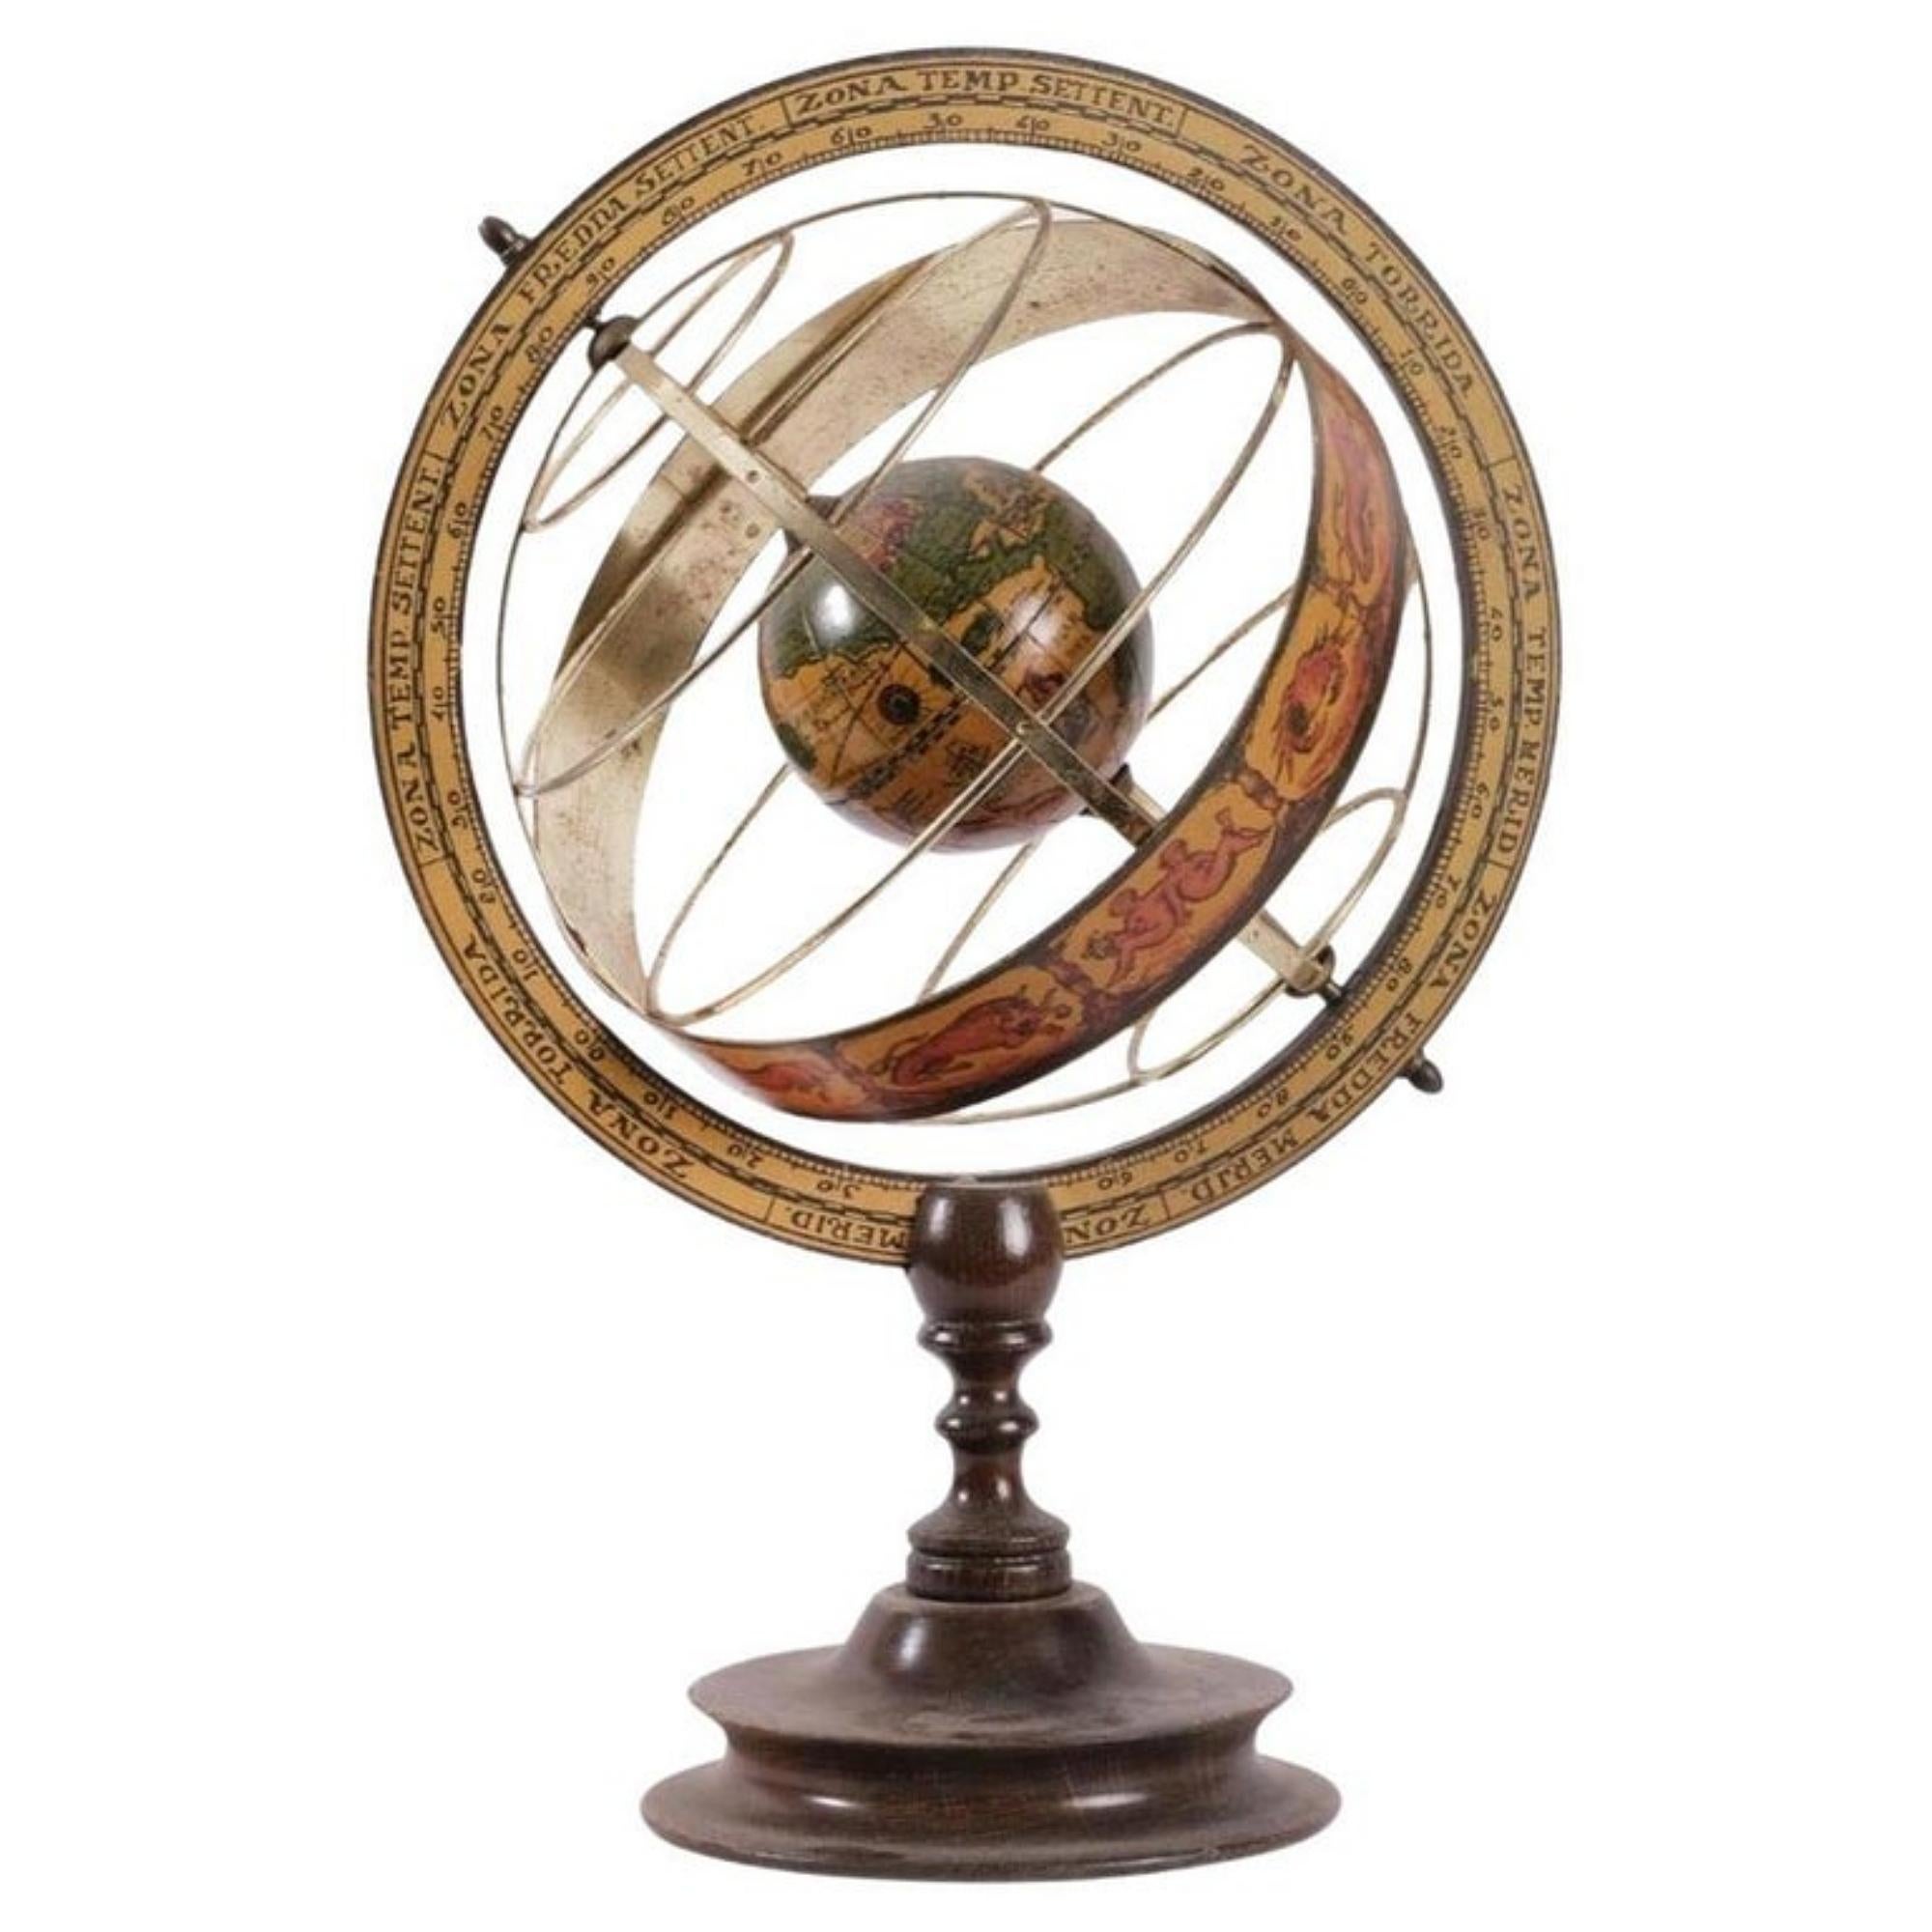 Modern Beautiful Italian Metal Armillary Sphere with Wooden Base, Early 20th Century